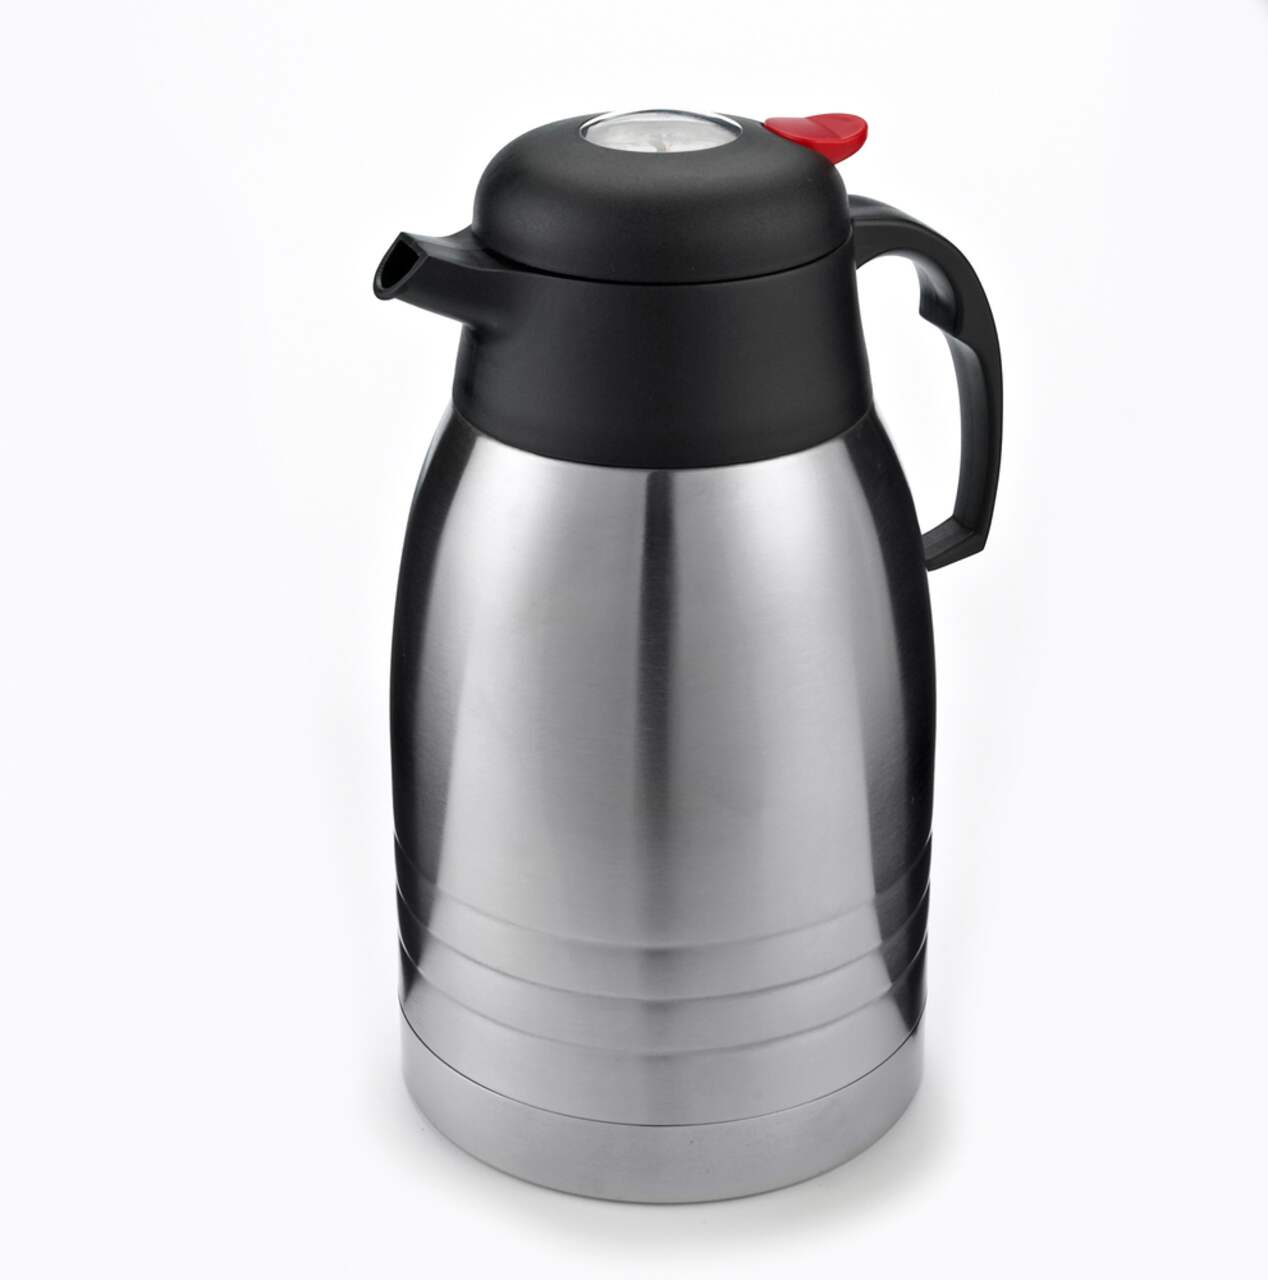 https://media-www.canadiantire.ca/product/living/kitchen/dining-and-entertaining/1428177/primula-2l-ss-carafe-temp-39e6074b-54cc-4bc7-af4f-15d5e9a832b5.png?imdensity=1&imwidth=640&impolicy=mZoom